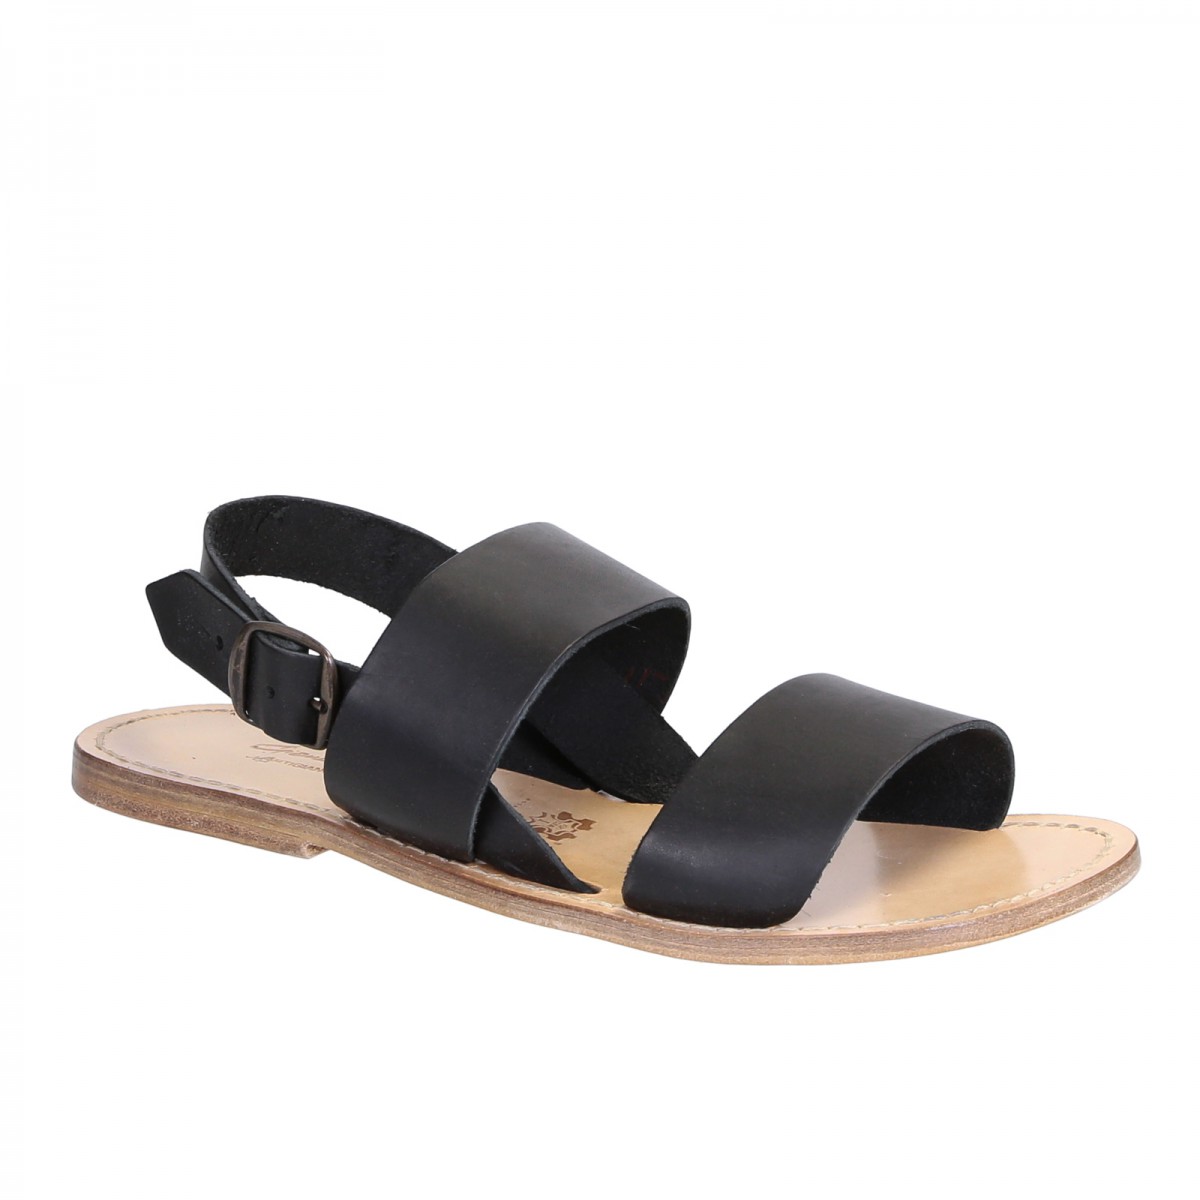 Black leather franciscan sandals for men with natural sole | The ...